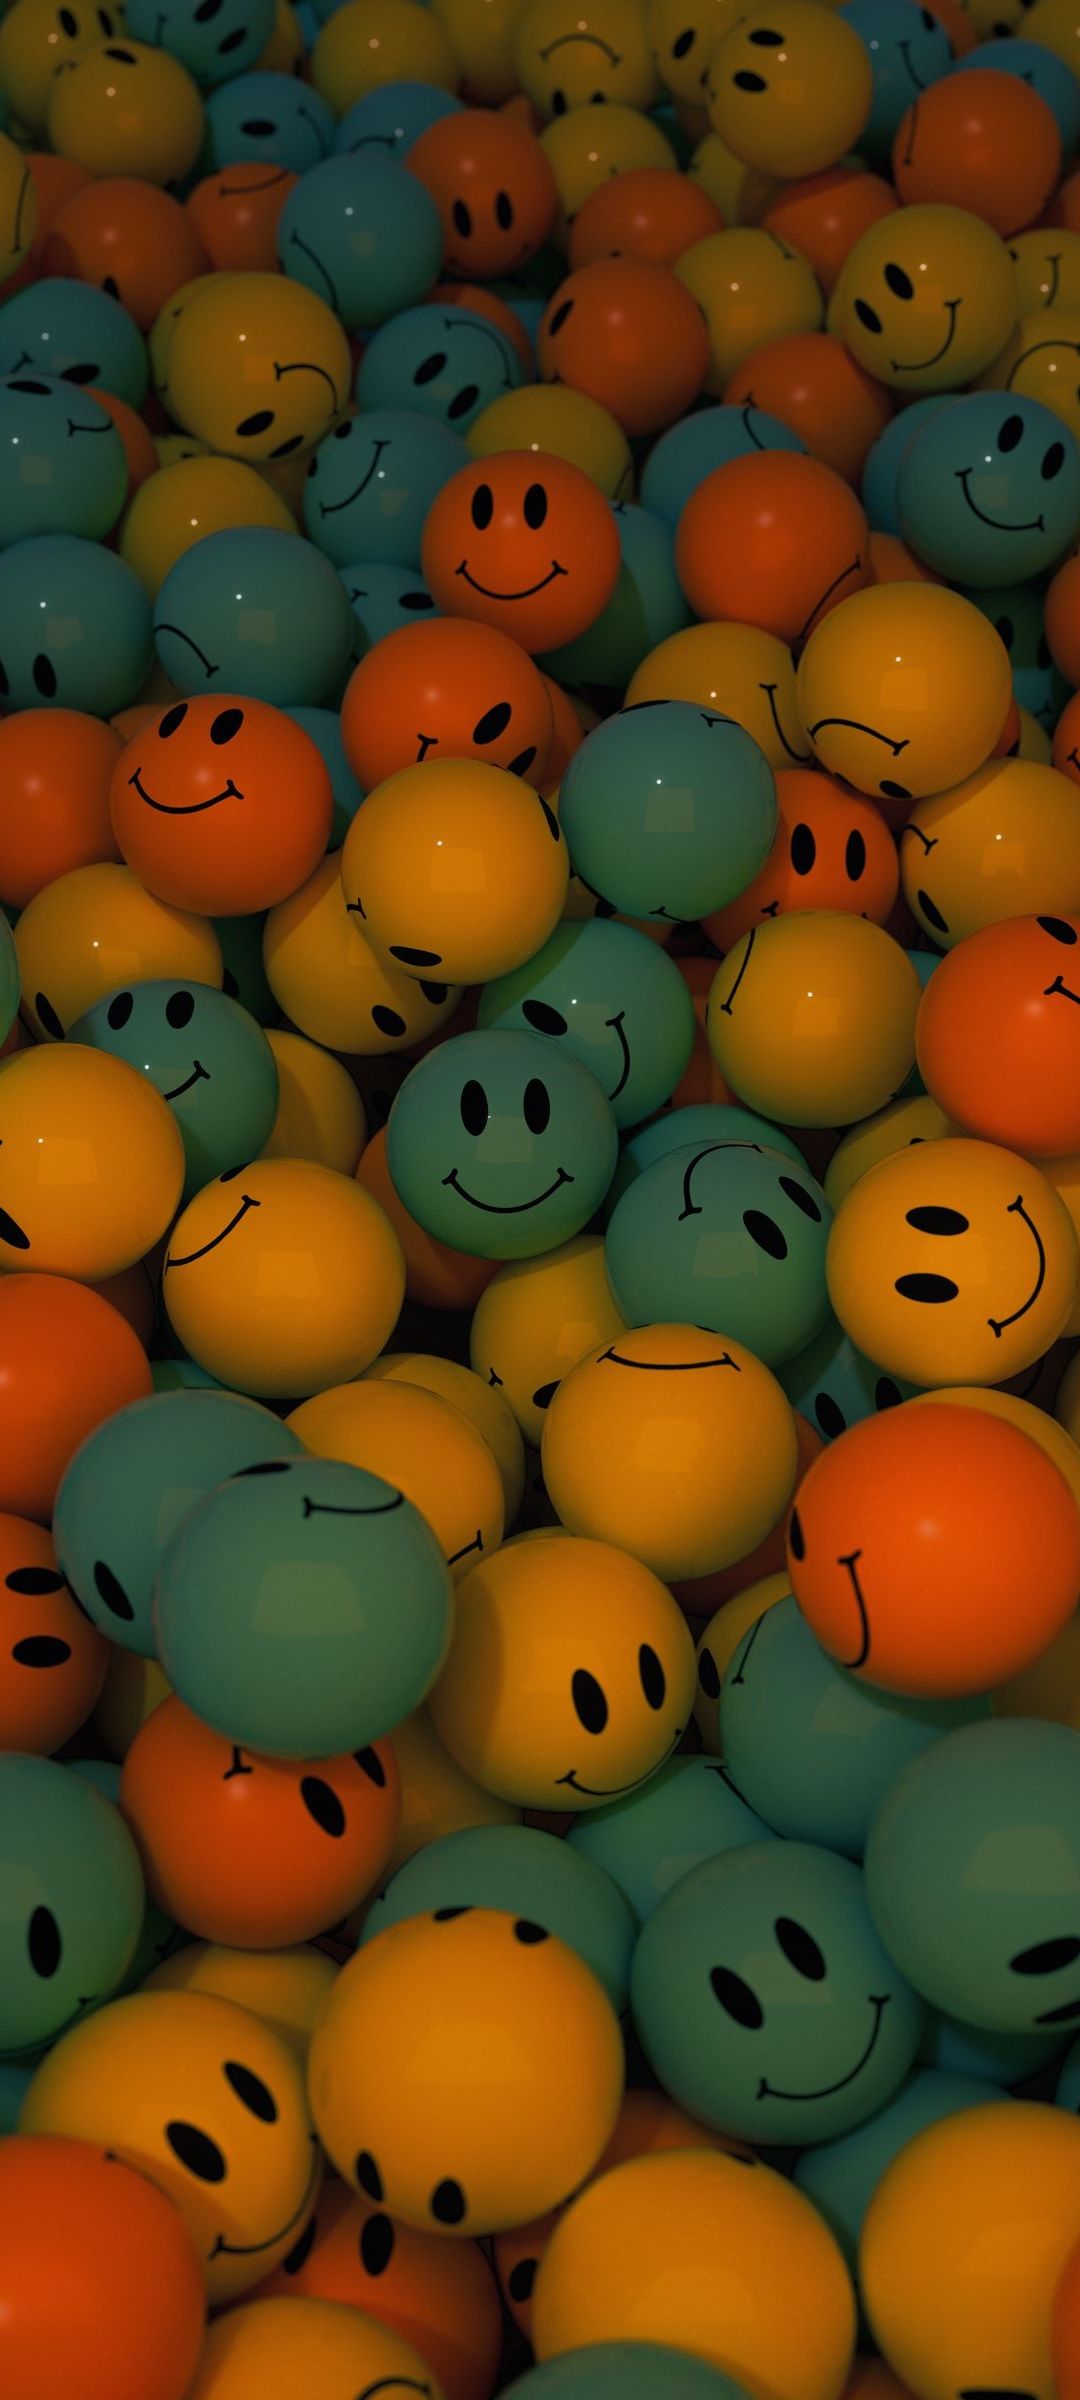 Free Download Smiley Balls Phone Wallpaper 1080x2400 For Your Desktop Mobile Tablet Explore 27 Smiley Ball Wallpapers Smiley Ball Wallpaper Wallpaper Hd Smiley Ball Smiley Backgrounds